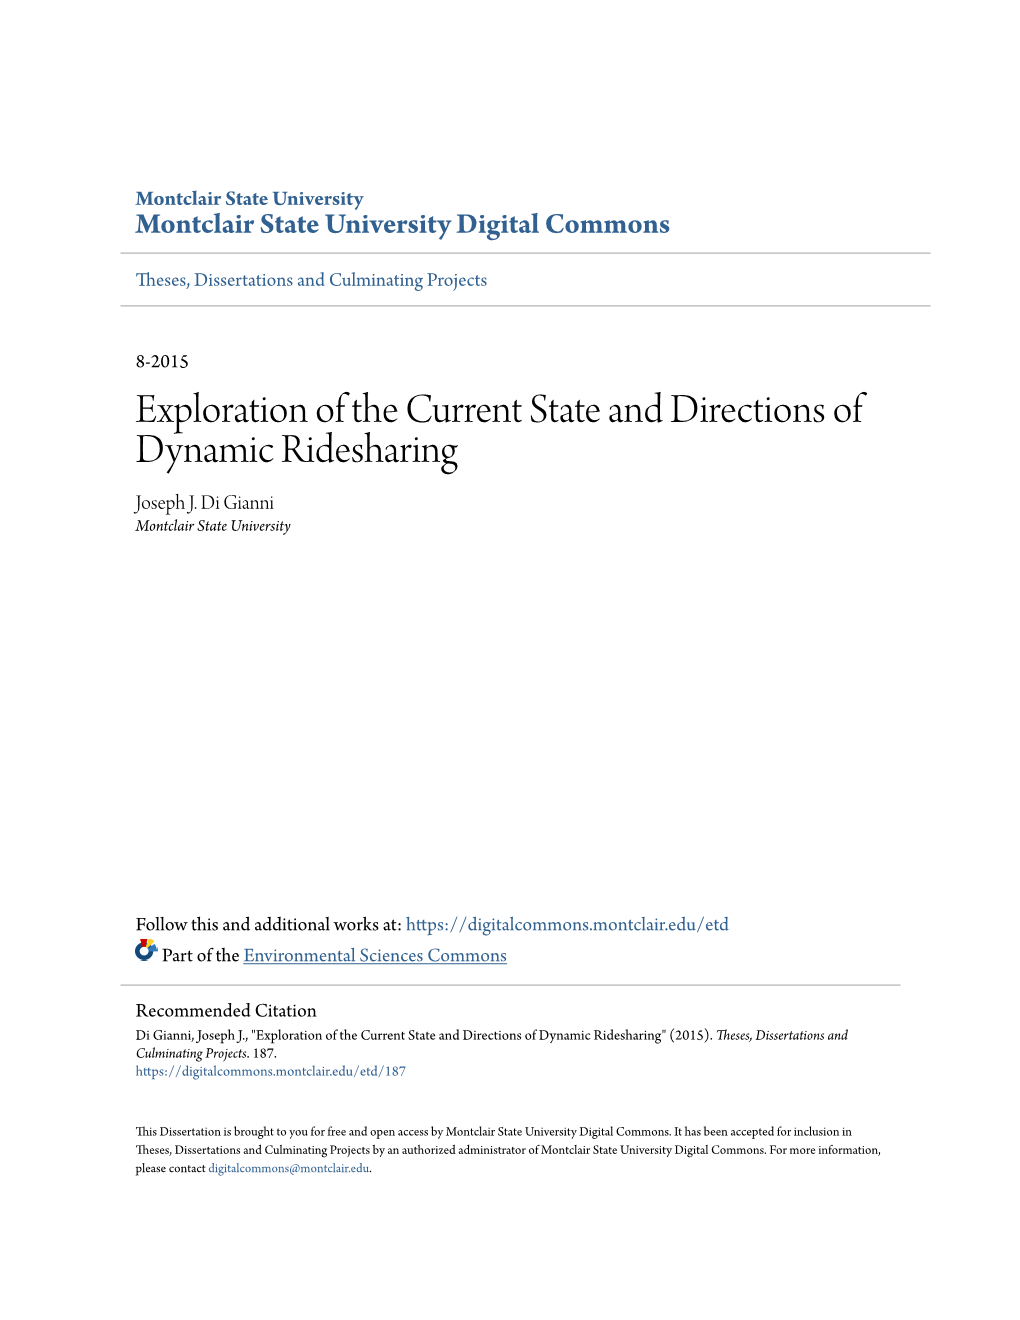 Exploration of the Current State and Directions of Dynamic Ridesharing Joseph J